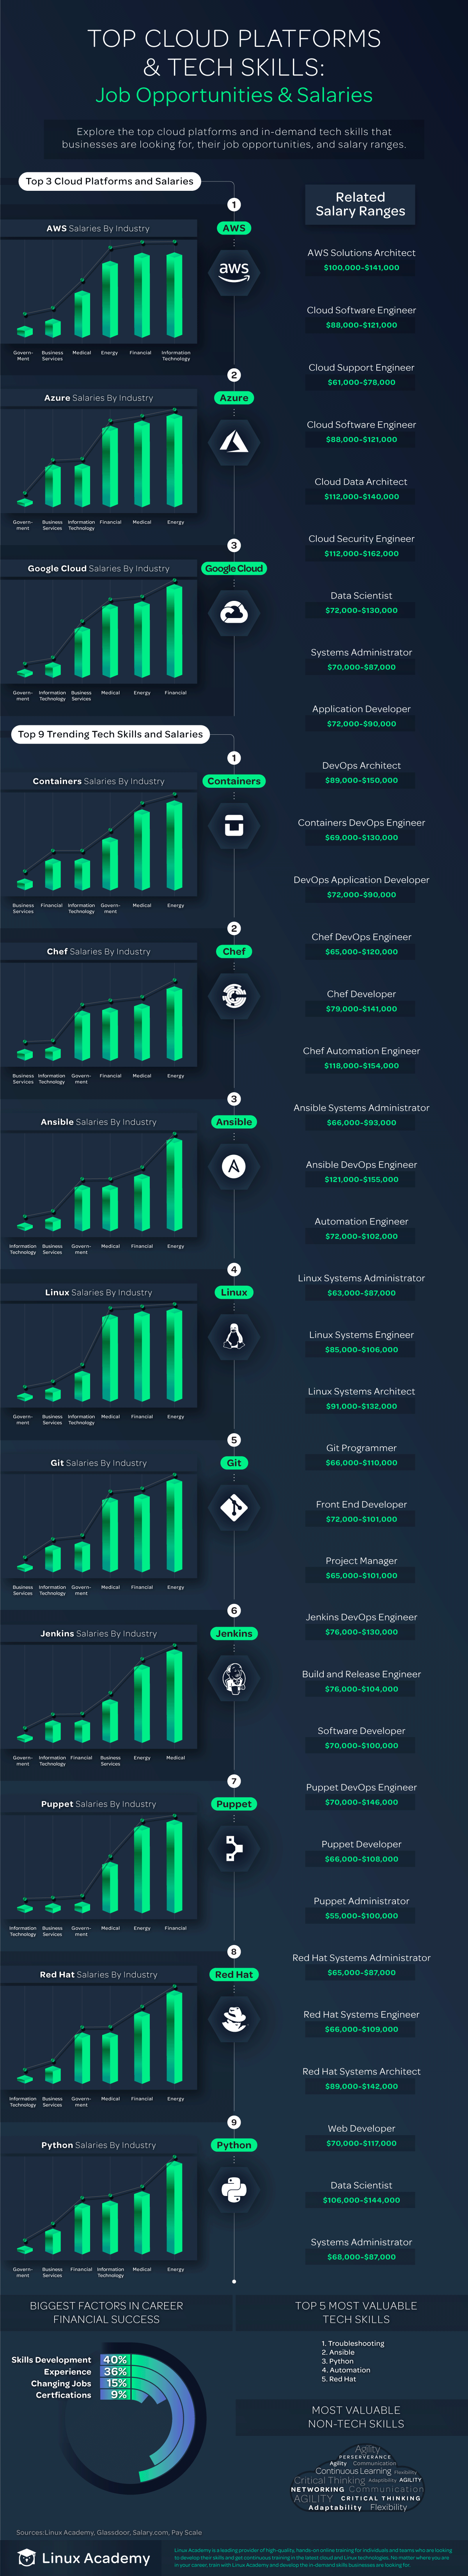 Infographic - Top Cloud Platforms, Tech Skills, Job Opportunities and Salary Ranges